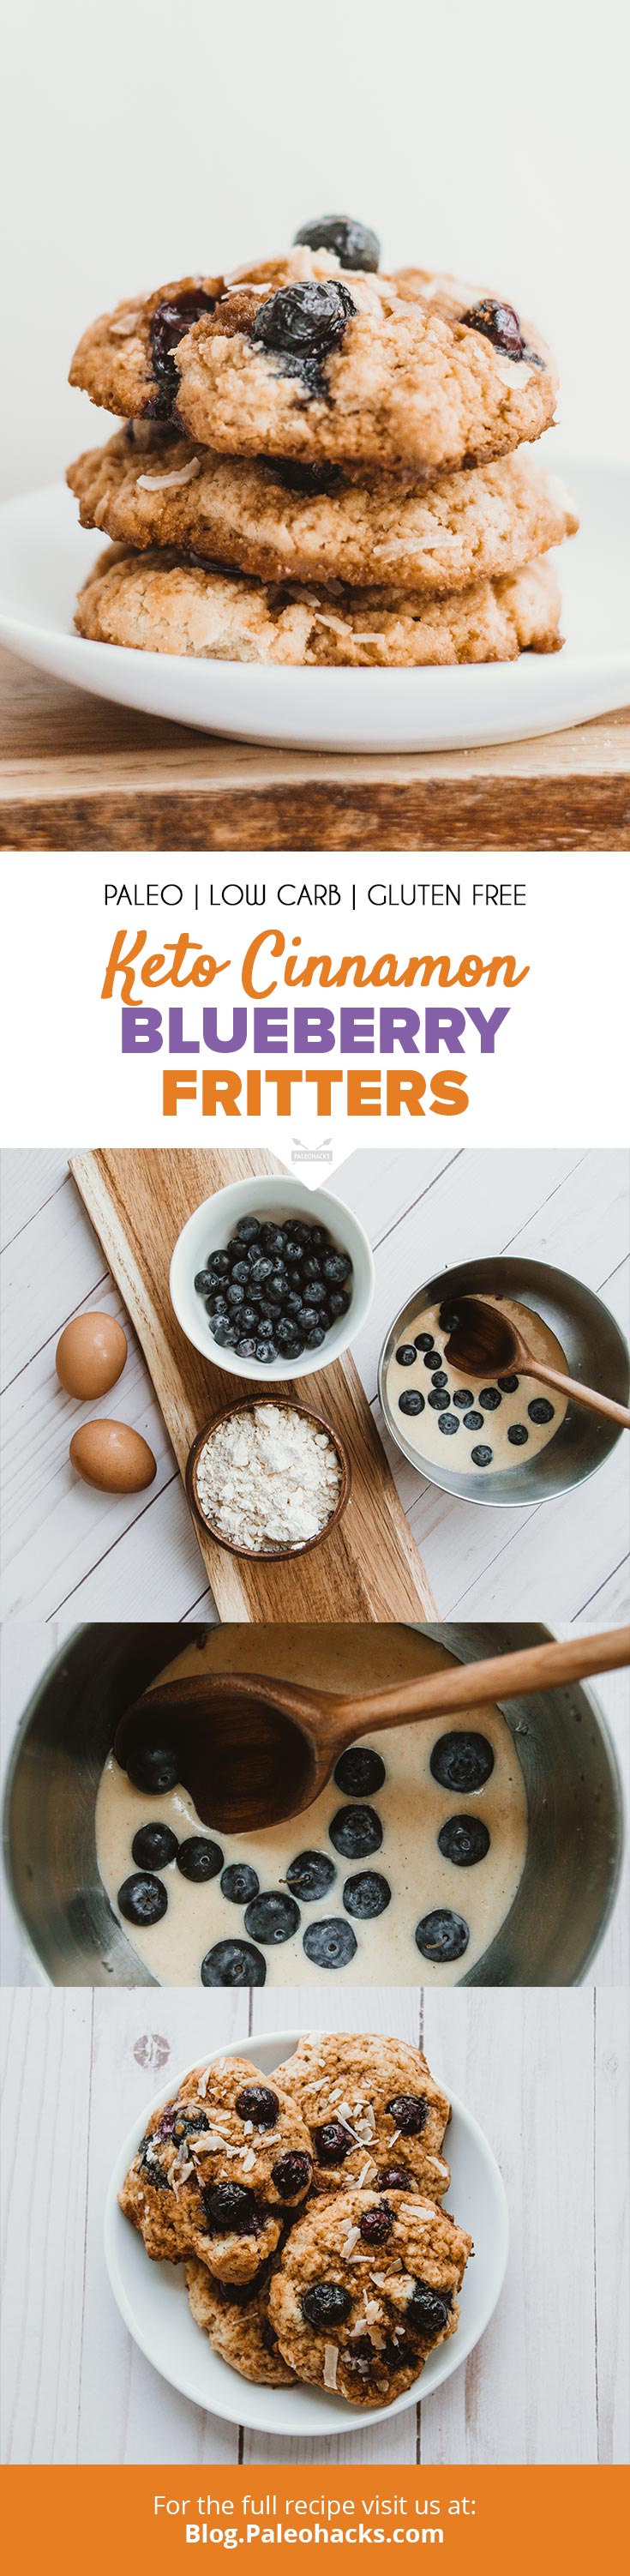 Indulge your sugar cravings with these keto-friendly blueberry fritters. Makes you wanna grab one through your computer screen!